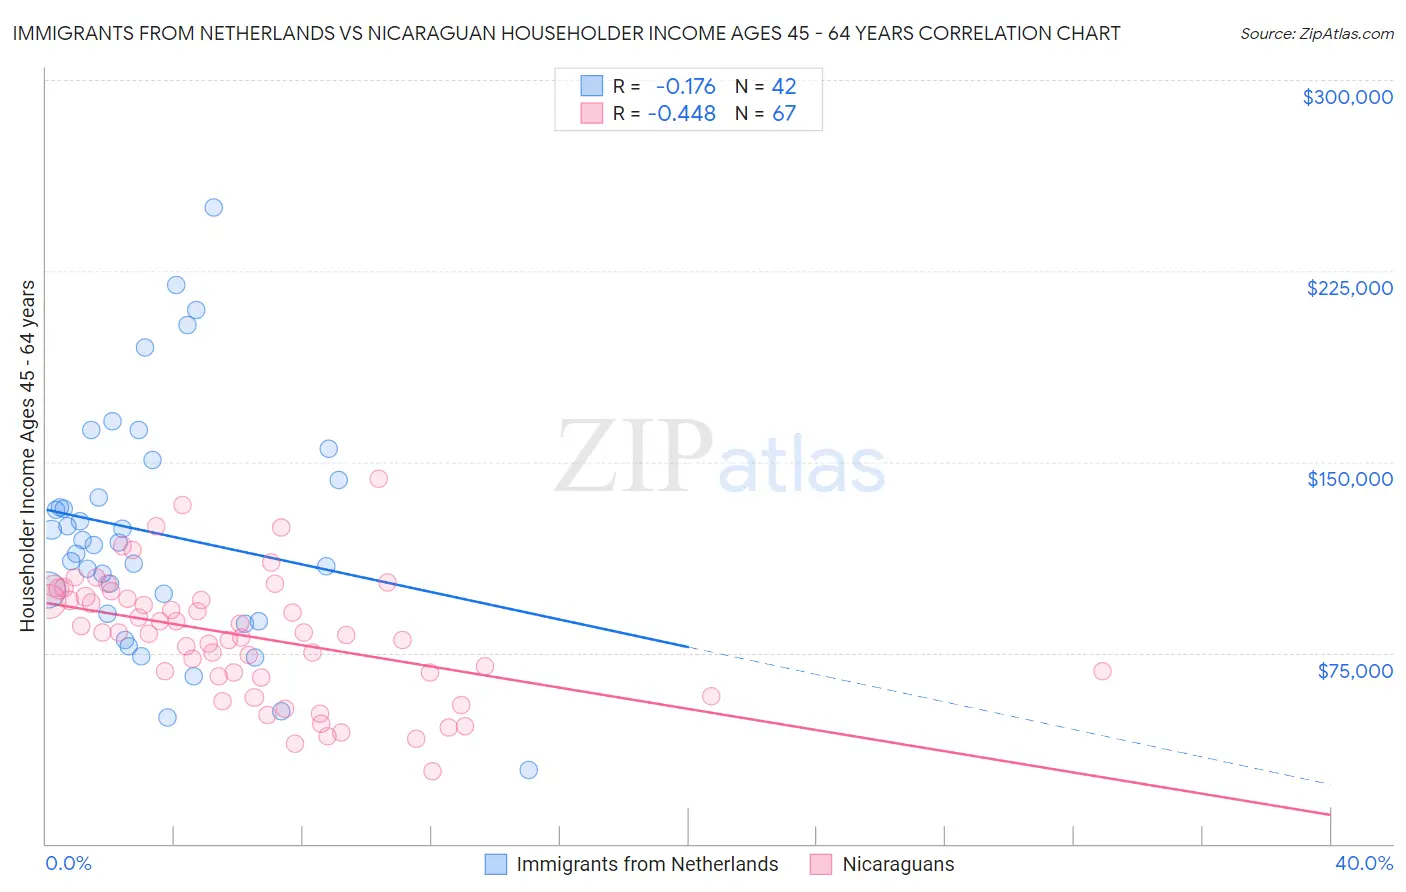 Immigrants from Netherlands vs Nicaraguan Householder Income Ages 45 - 64 years